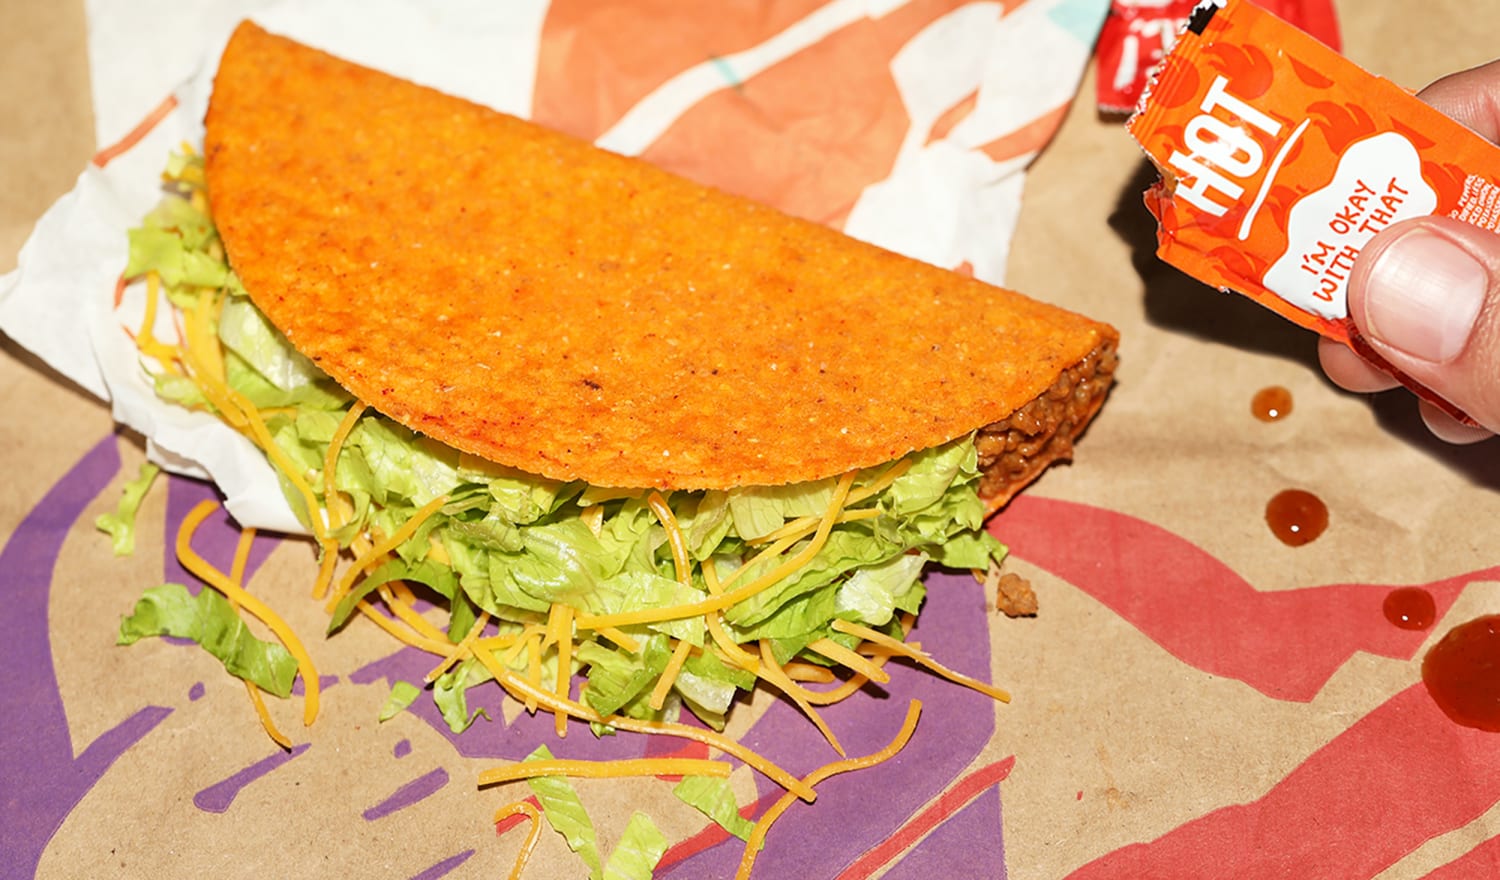 Taco Bell will help pay for your tacos today — even if they're not from Taco Bell